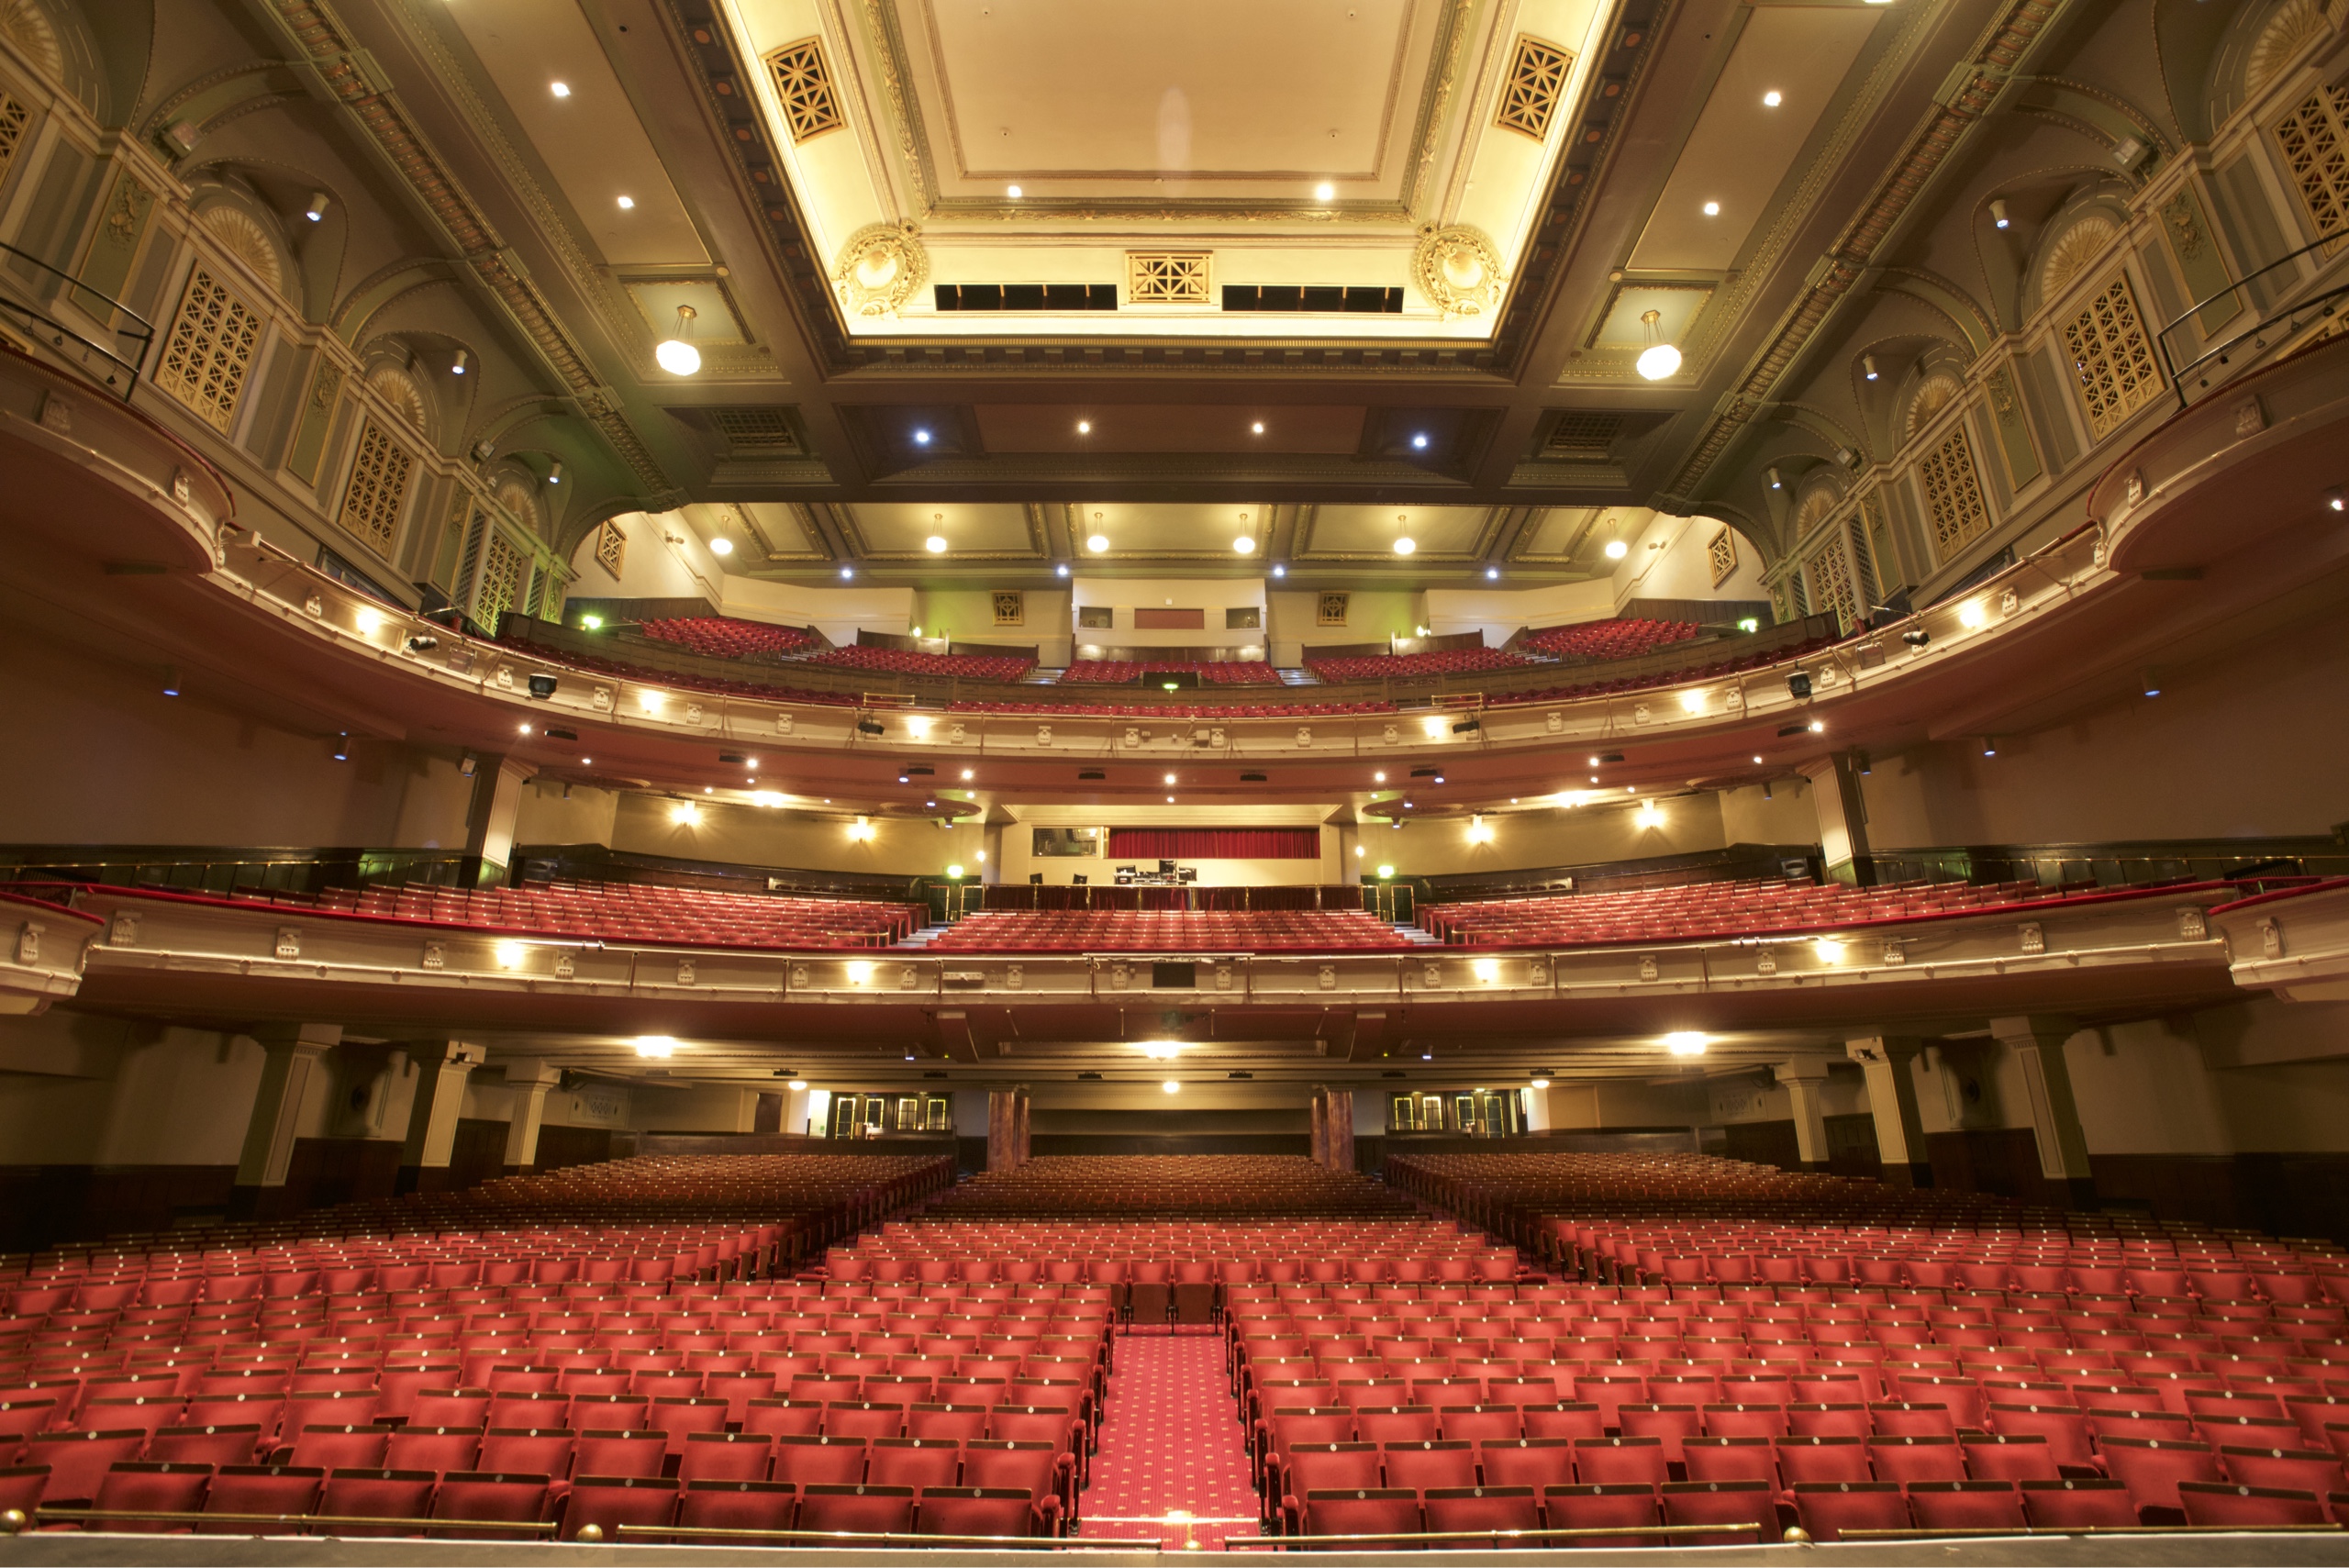 King S Theatre Edinburgh Seating Layout Awesome Home